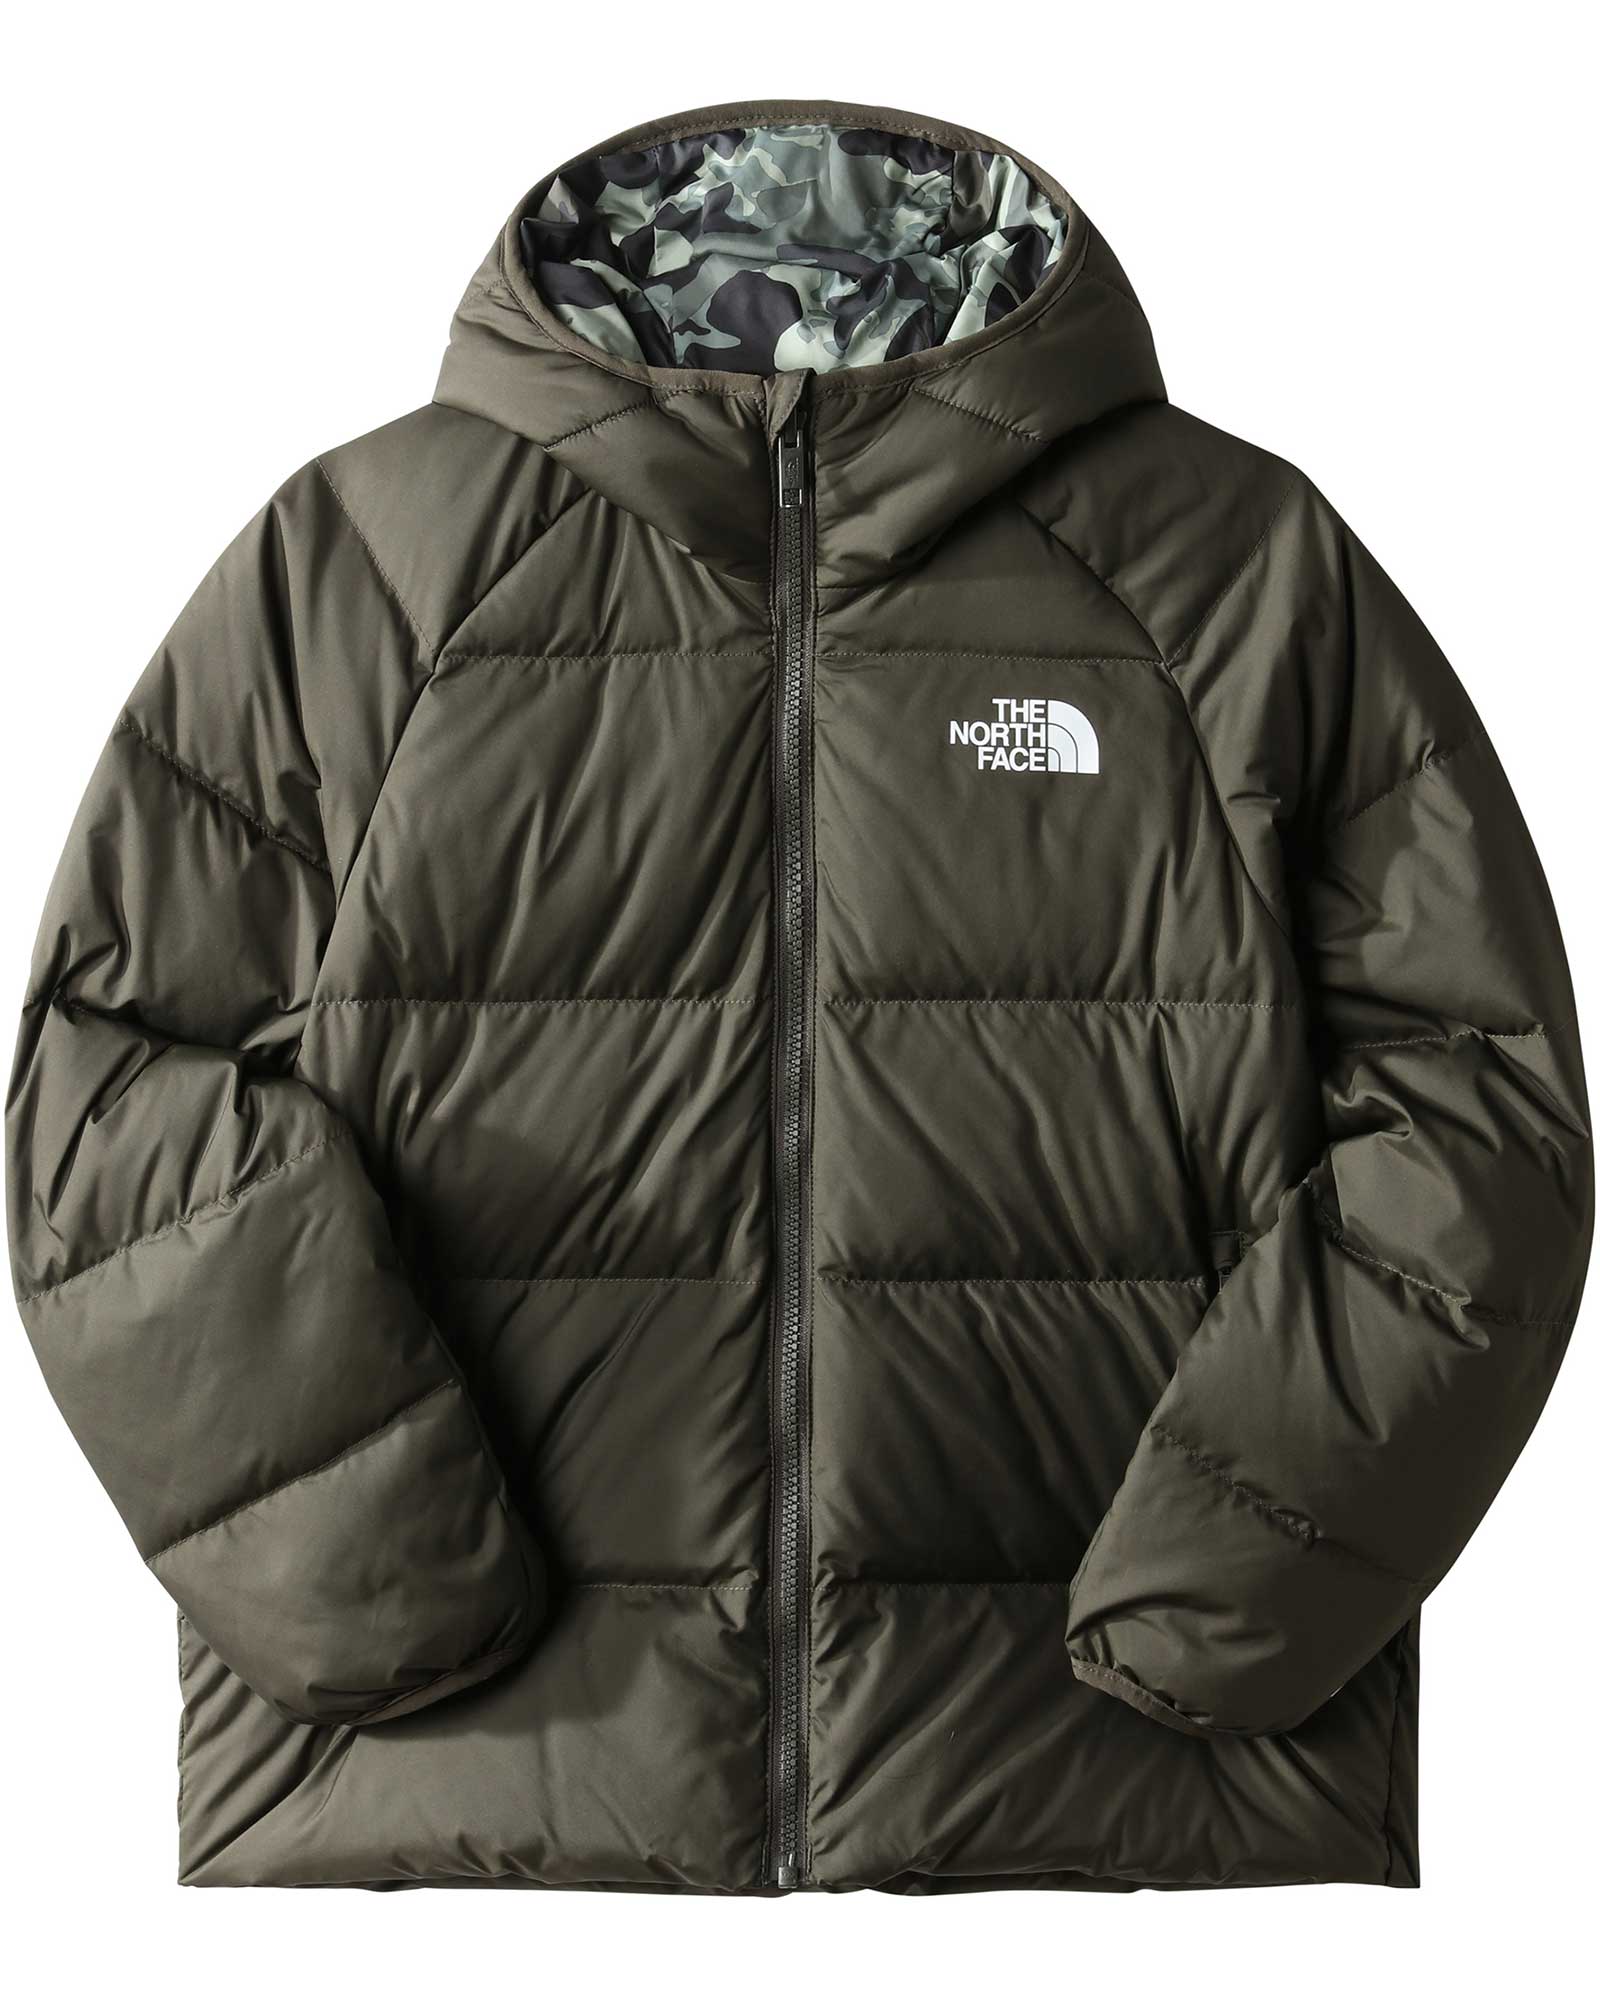 The North Face Print North Kids’ Down Hooded Jacket XL - New Taupe Green XL